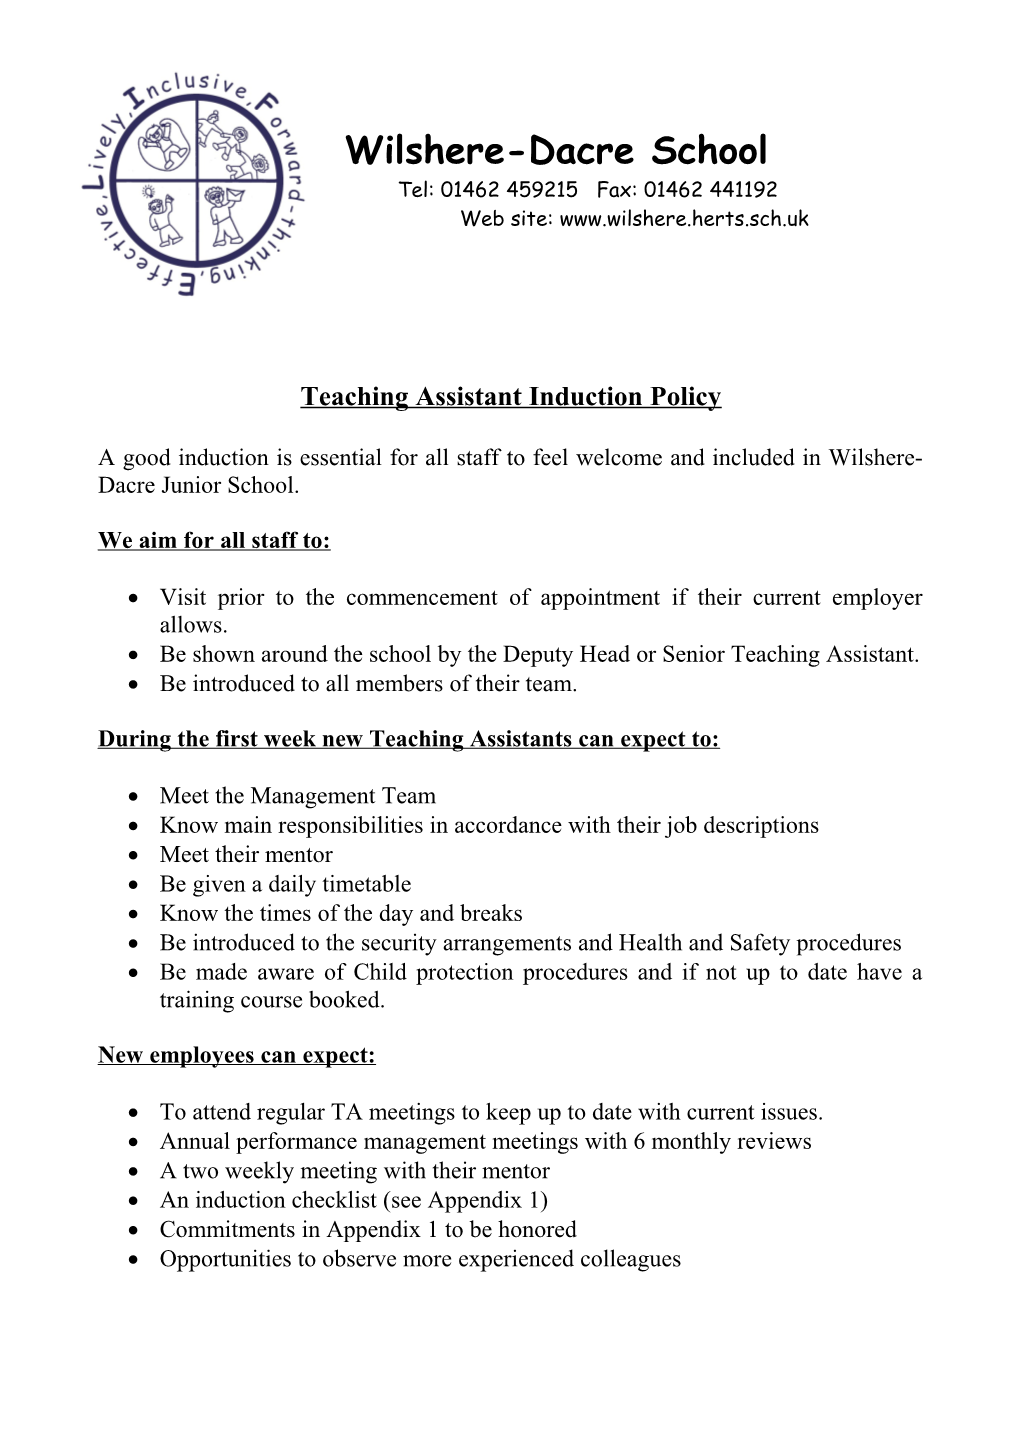 Teaching Assistant Induction Policy